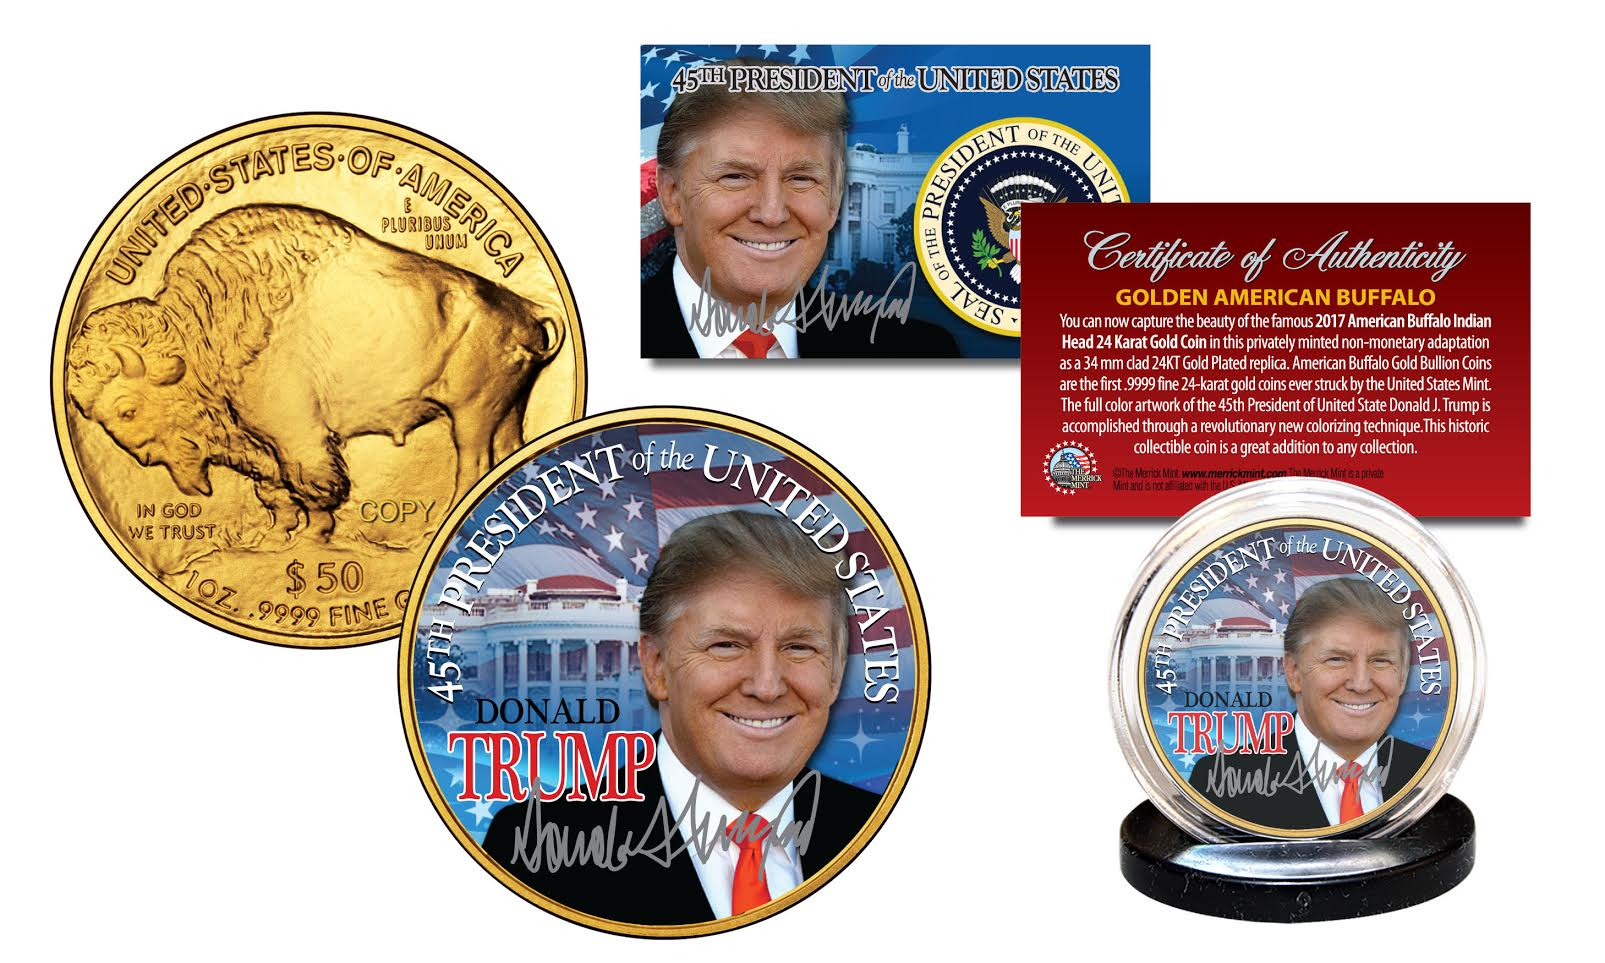 WR Donald Trump Merry Christmas 24k Gold Coin US Make Christmas Great Again Gift 